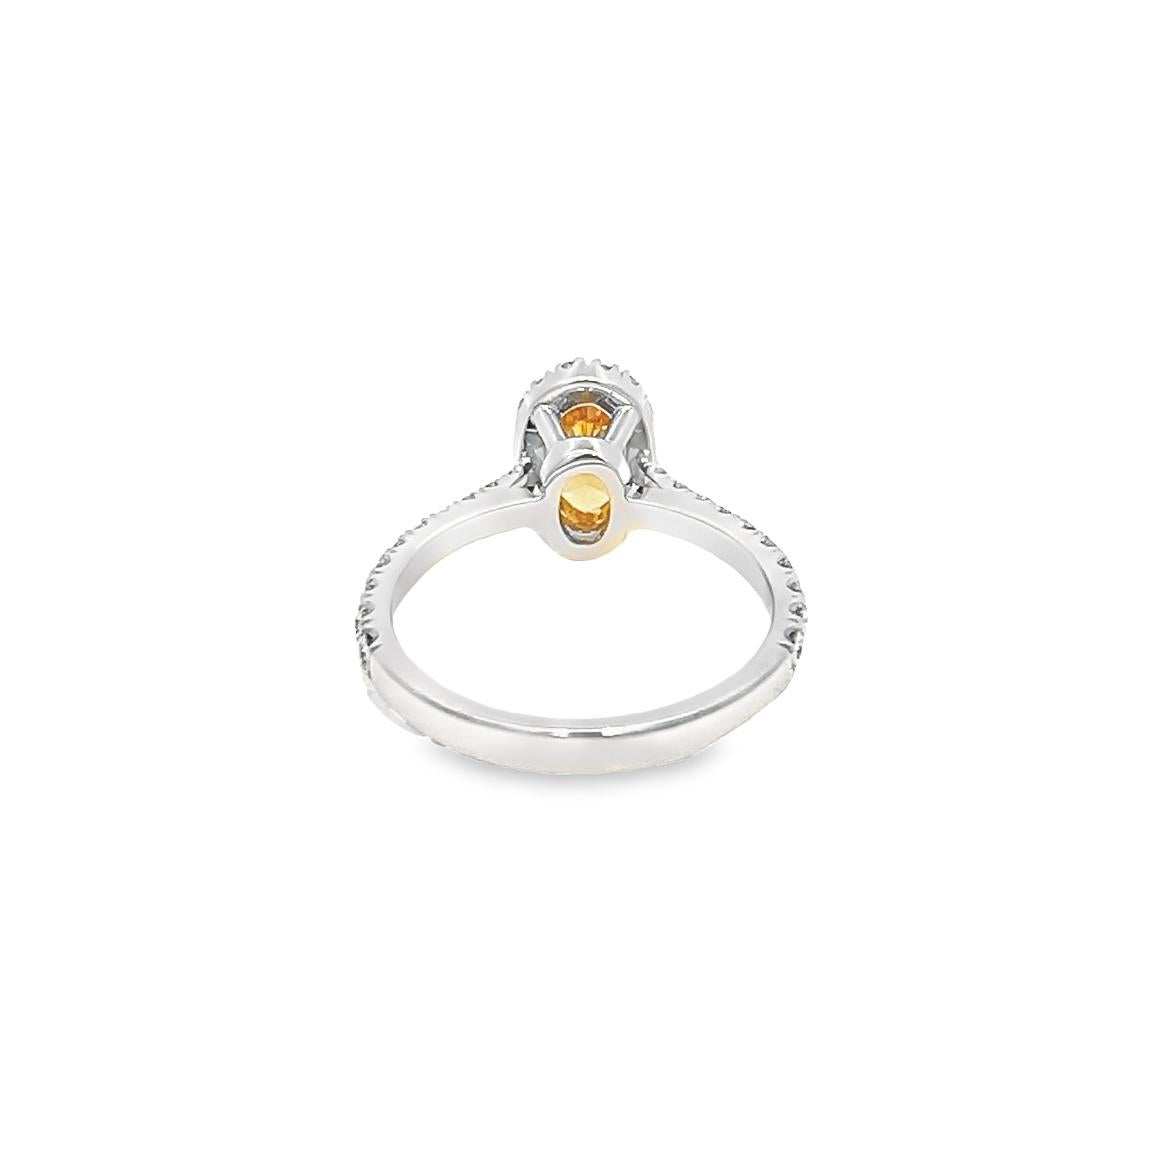 Oval Cut 1.27 Total Weight Natural, Fancy Vivid Yellow-Orange, Even, Diamond Ring GIA For Sale